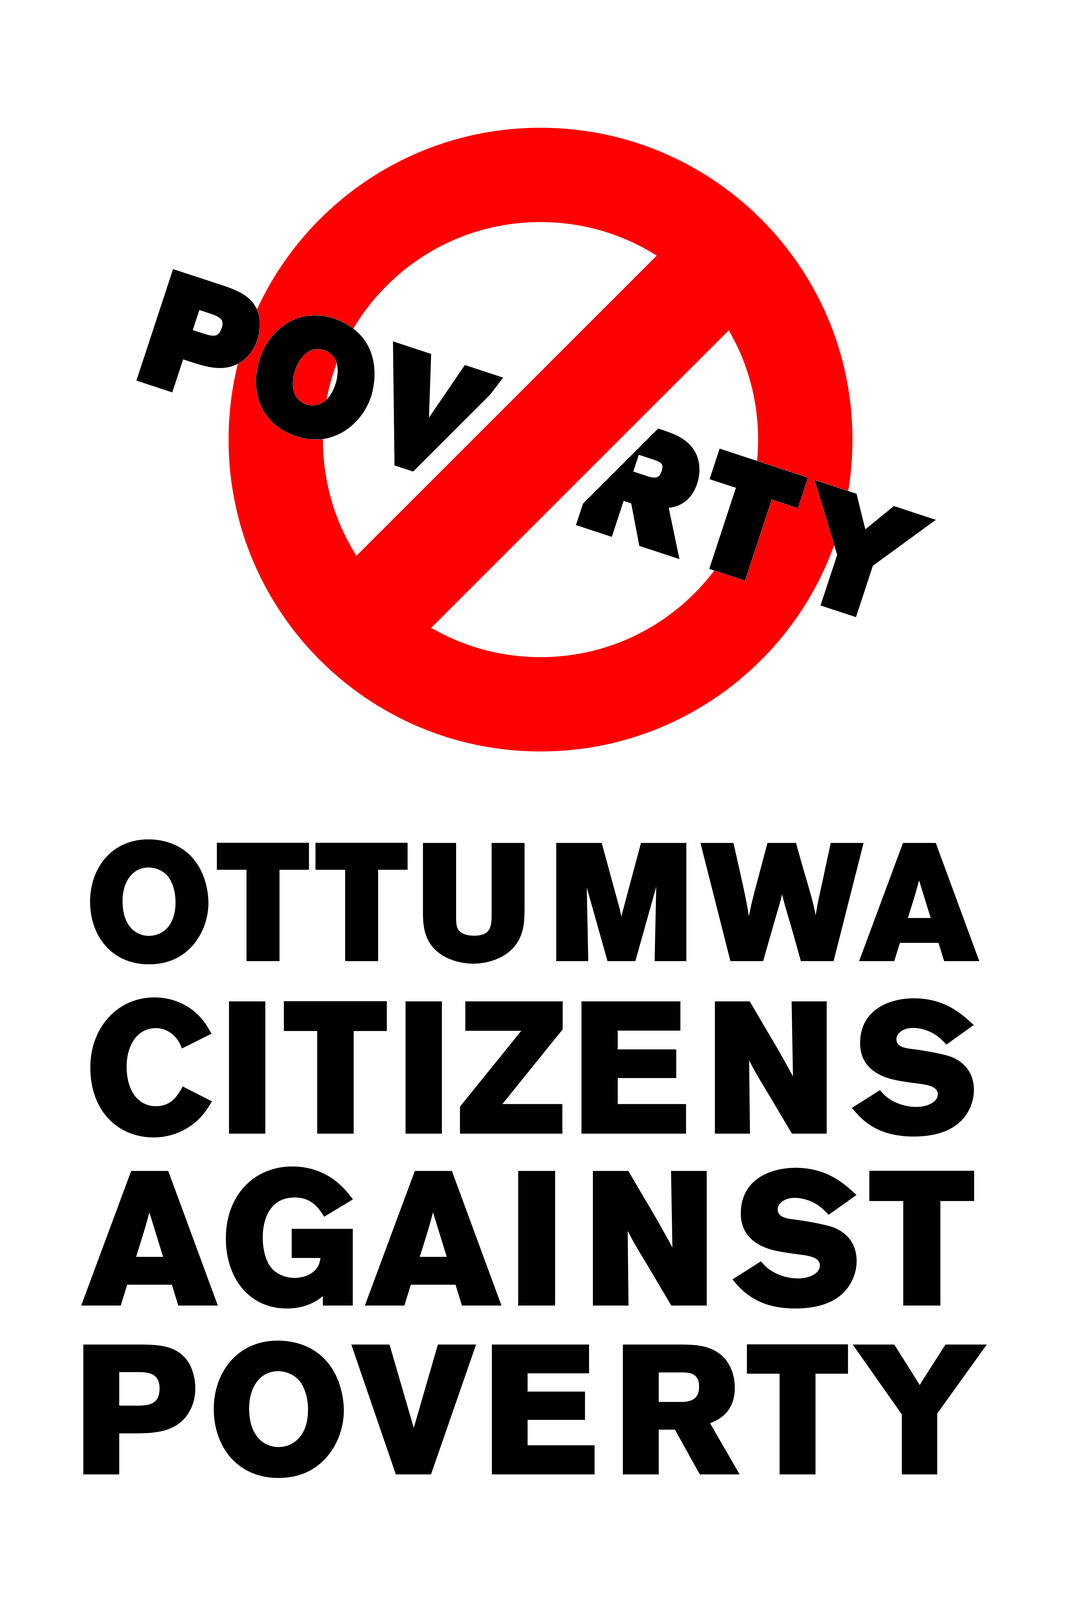 Branding made for the Ottumwa Citizens Against Poverty, an activist group based out of Ottumwa, Iowa